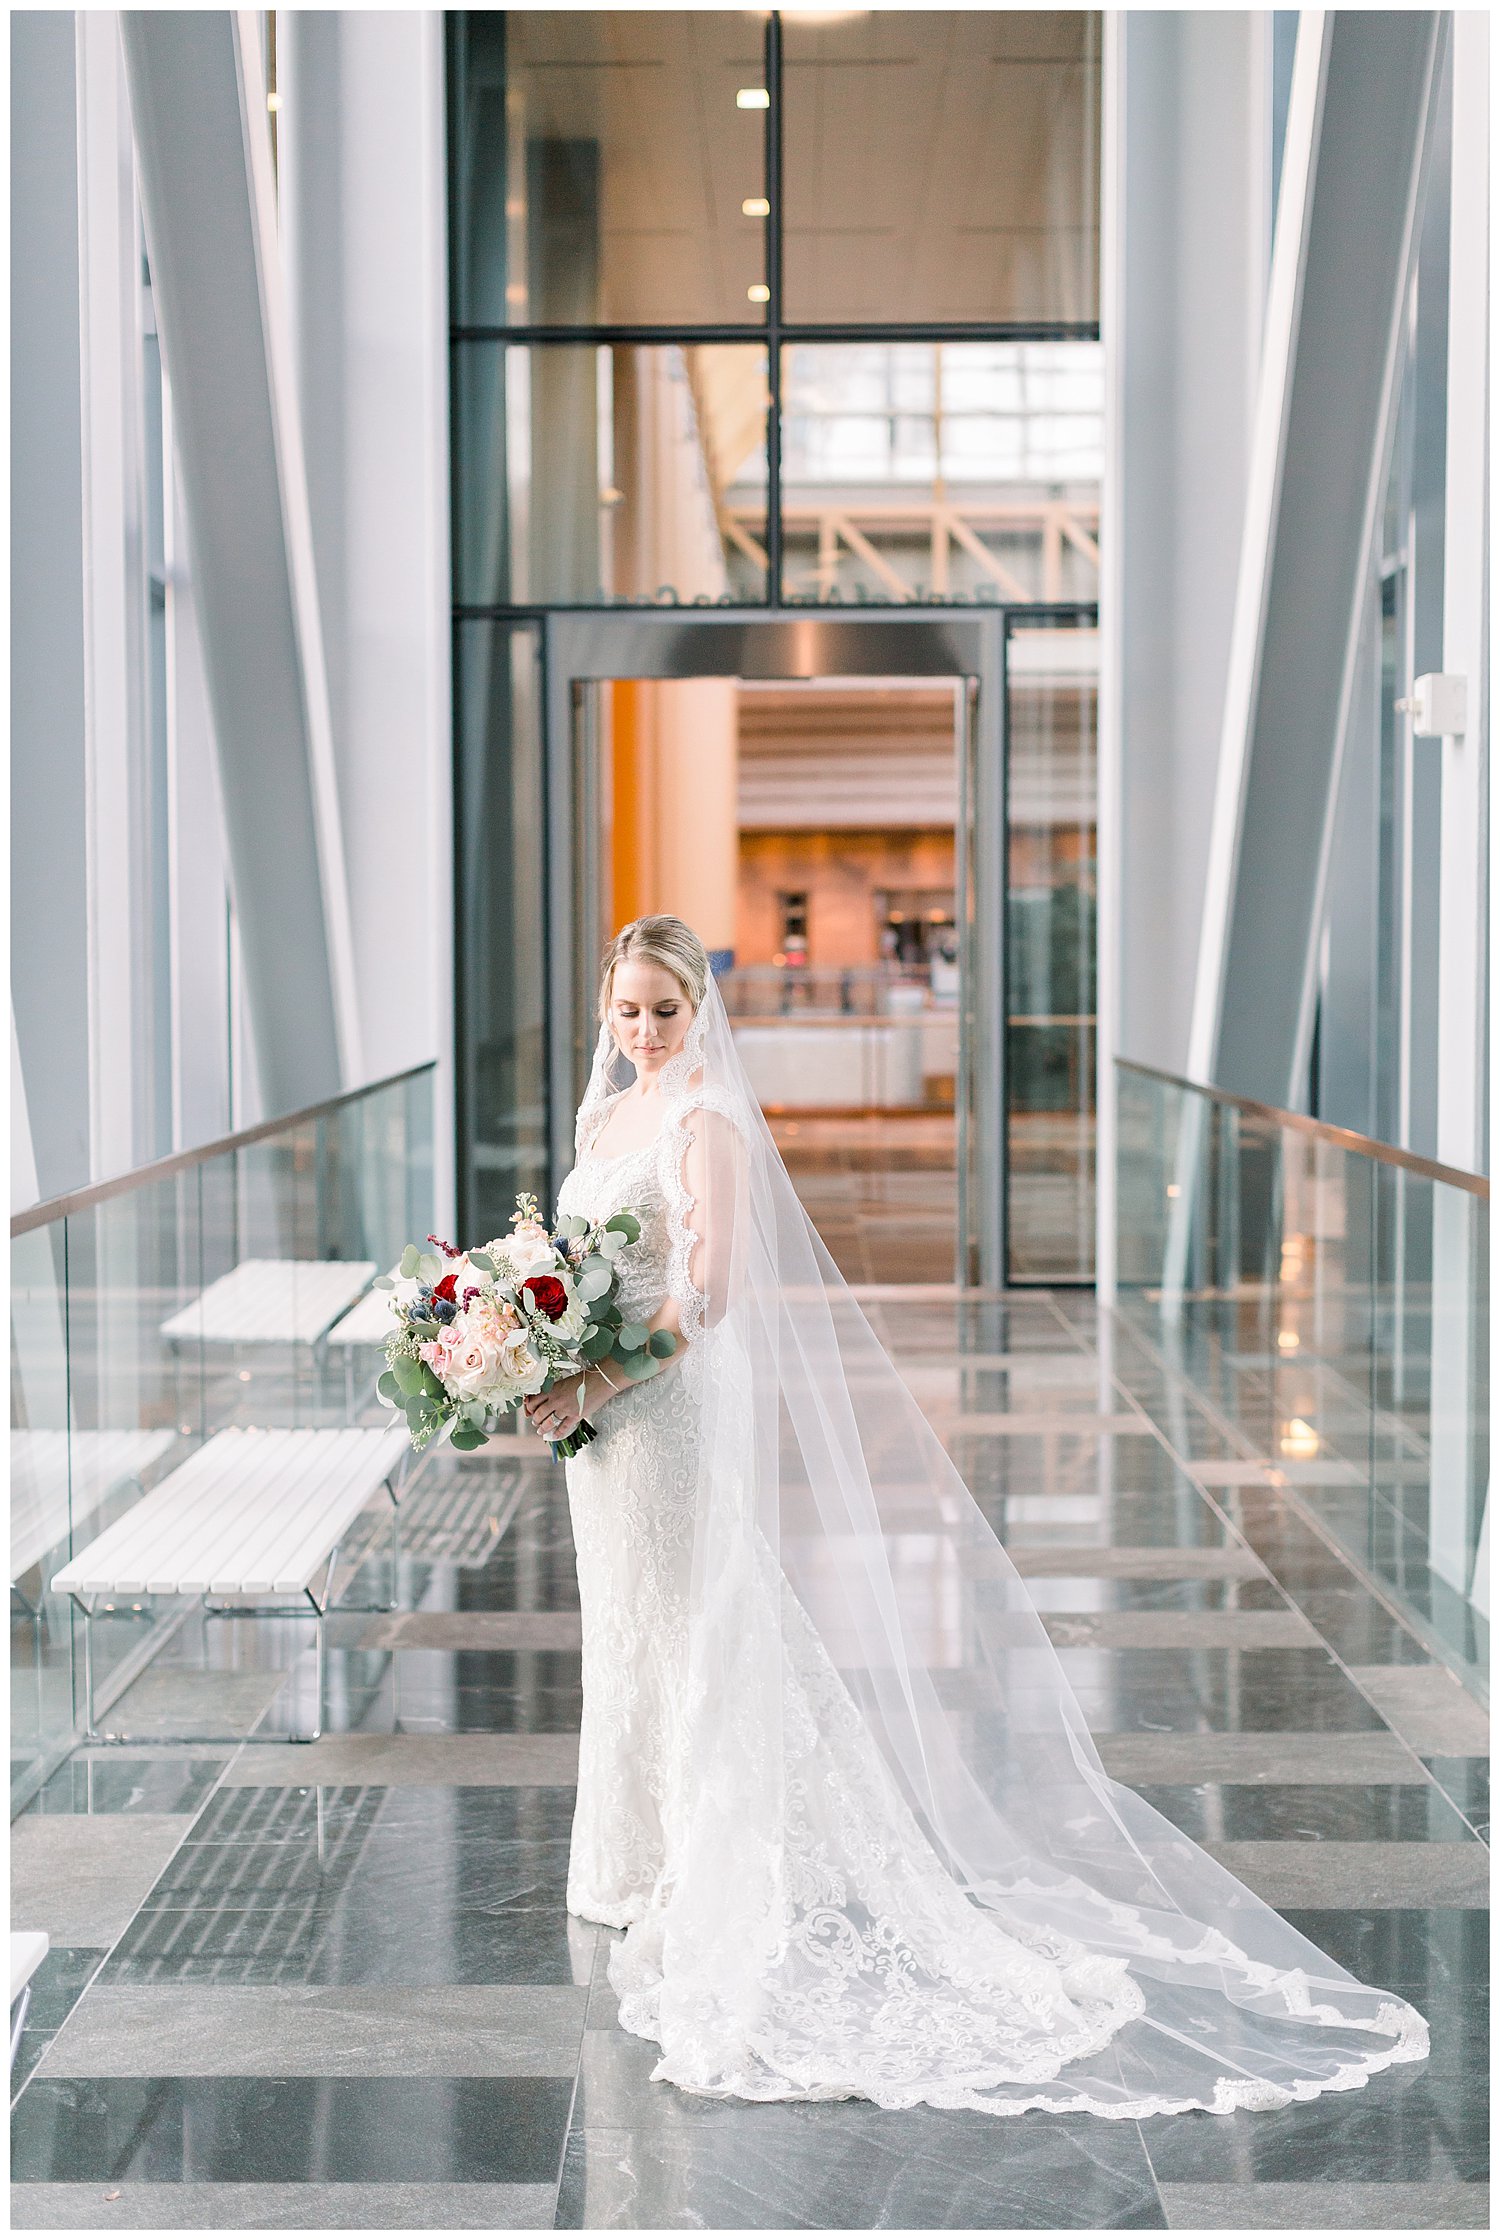 Bridal portrait with cathedral veil at Ritz Carlton